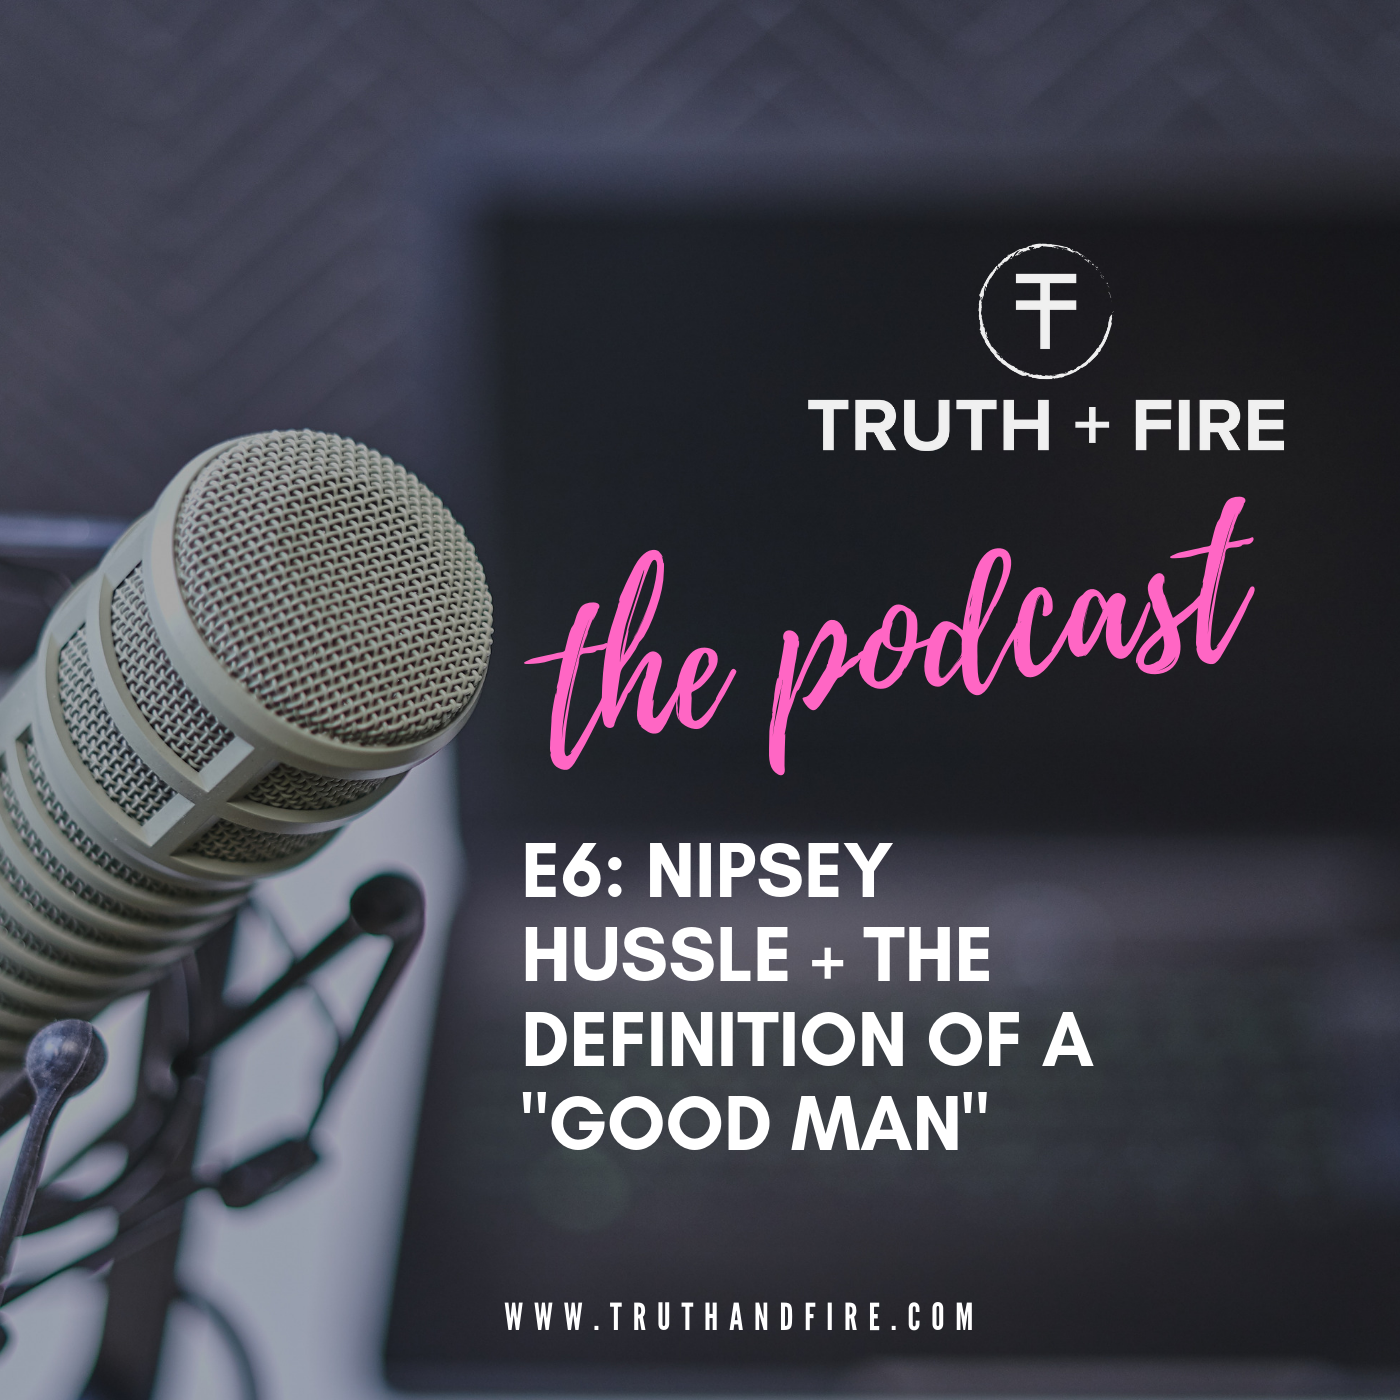 E7: Nipsey Hussle + The Definition of a "Good Man"